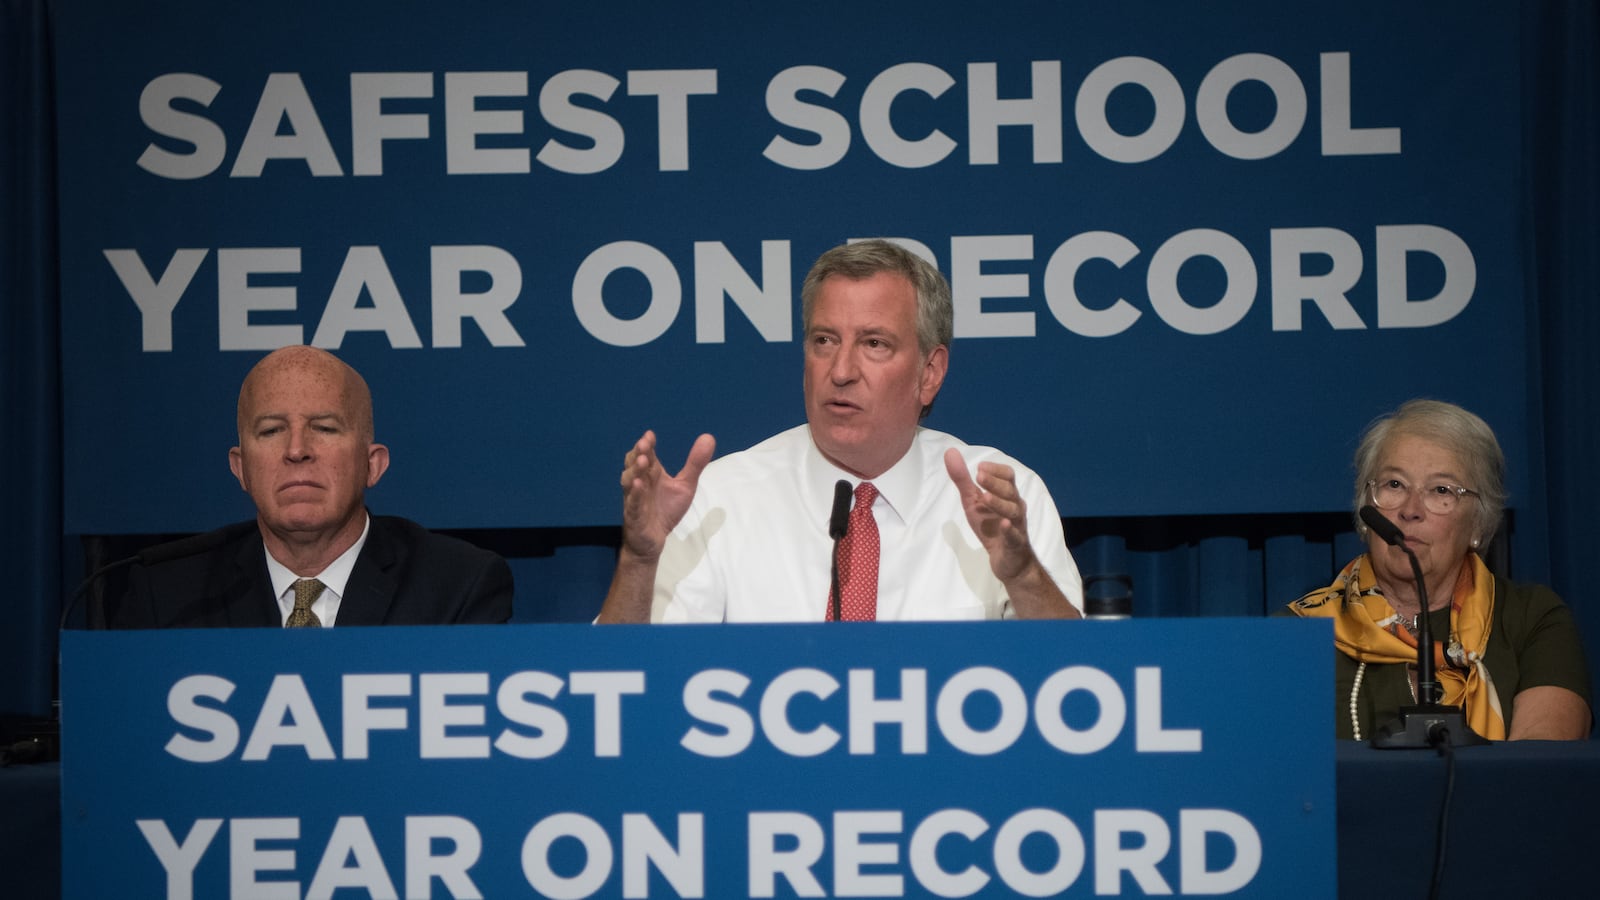 Mayor Bill de Blasio, flanked by police Commissioner James O’Neill and Chancellor Carmen Fariña held a press conference on school safety at M.S. 88 in Brooklyn in August.